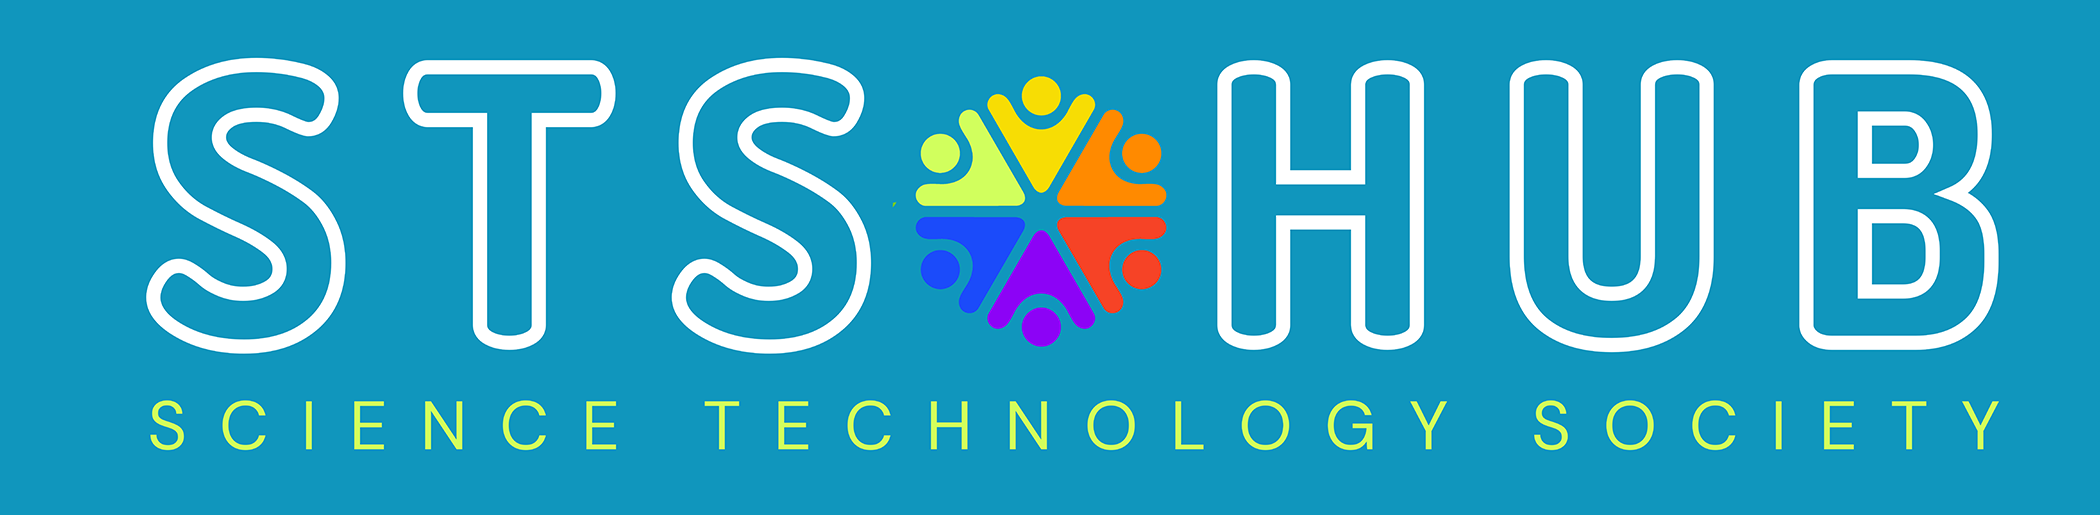 The STS Hub Banner. A turquoise background with white letters that read STS HUB Science, technology, and society. In the center is a graphic of a group of 6 people forming a circle, each a different color of the rainbow.